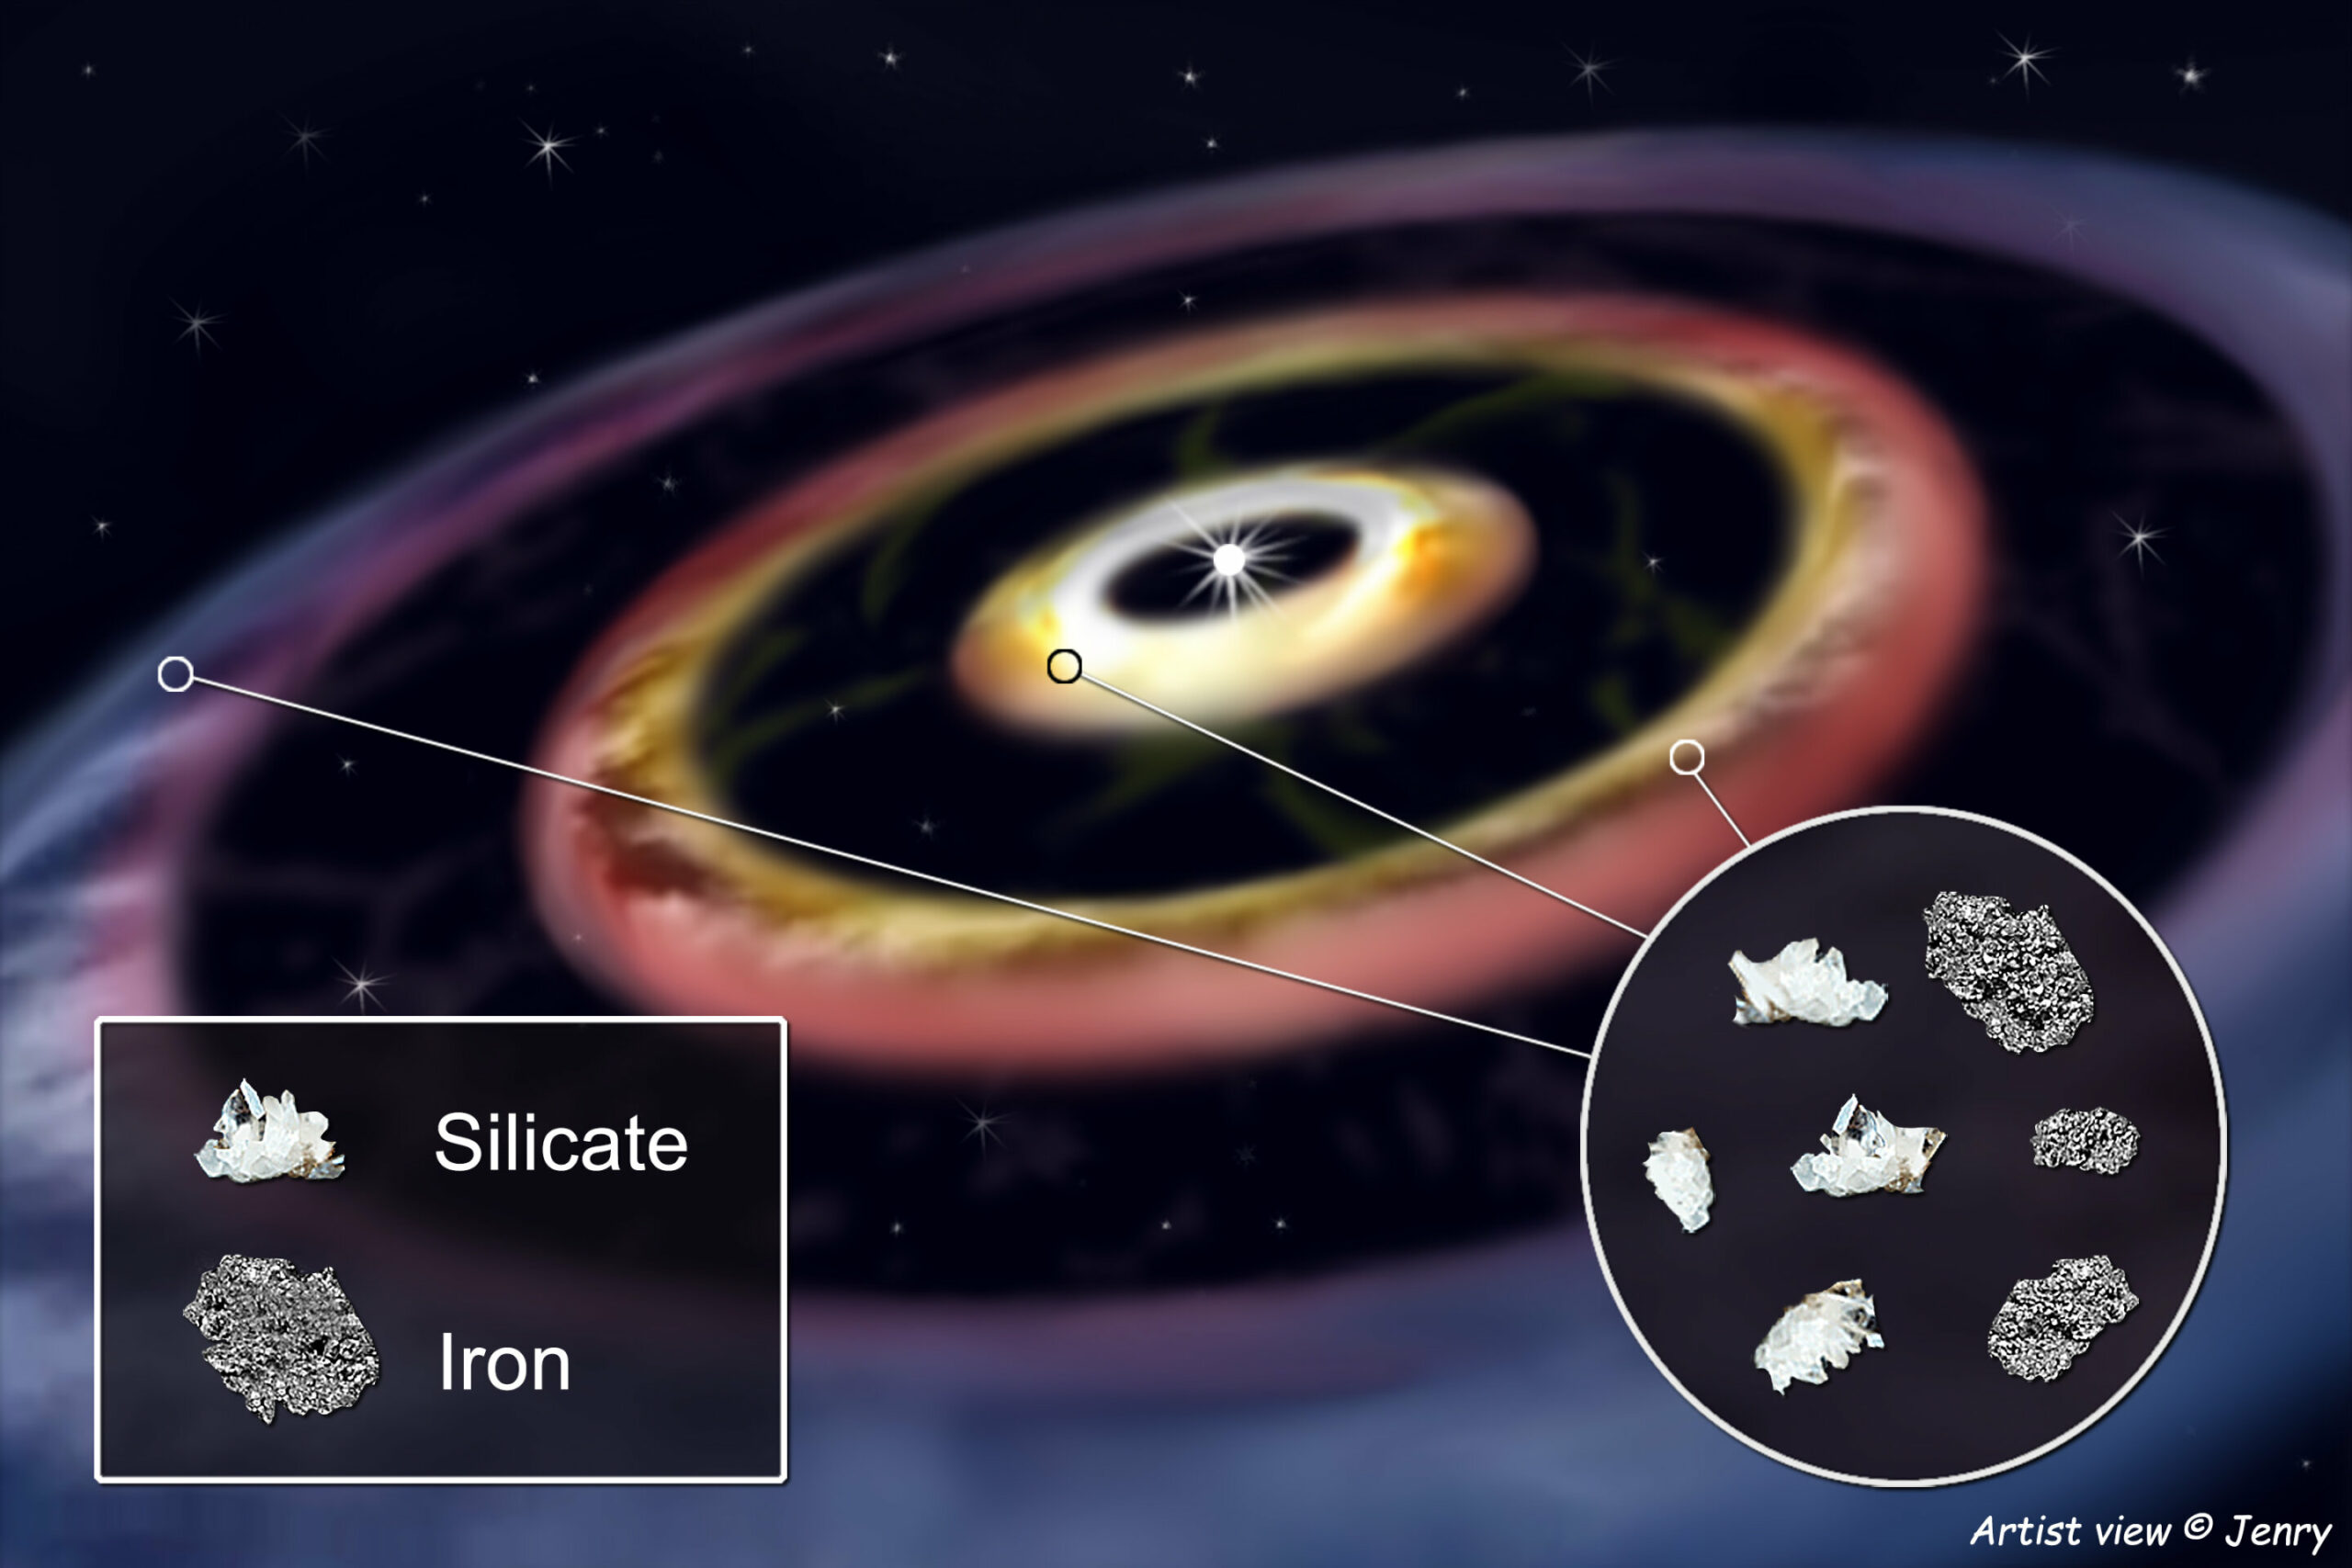 Astronomers Detect Three Iron Rings within a Disk Forming Planets